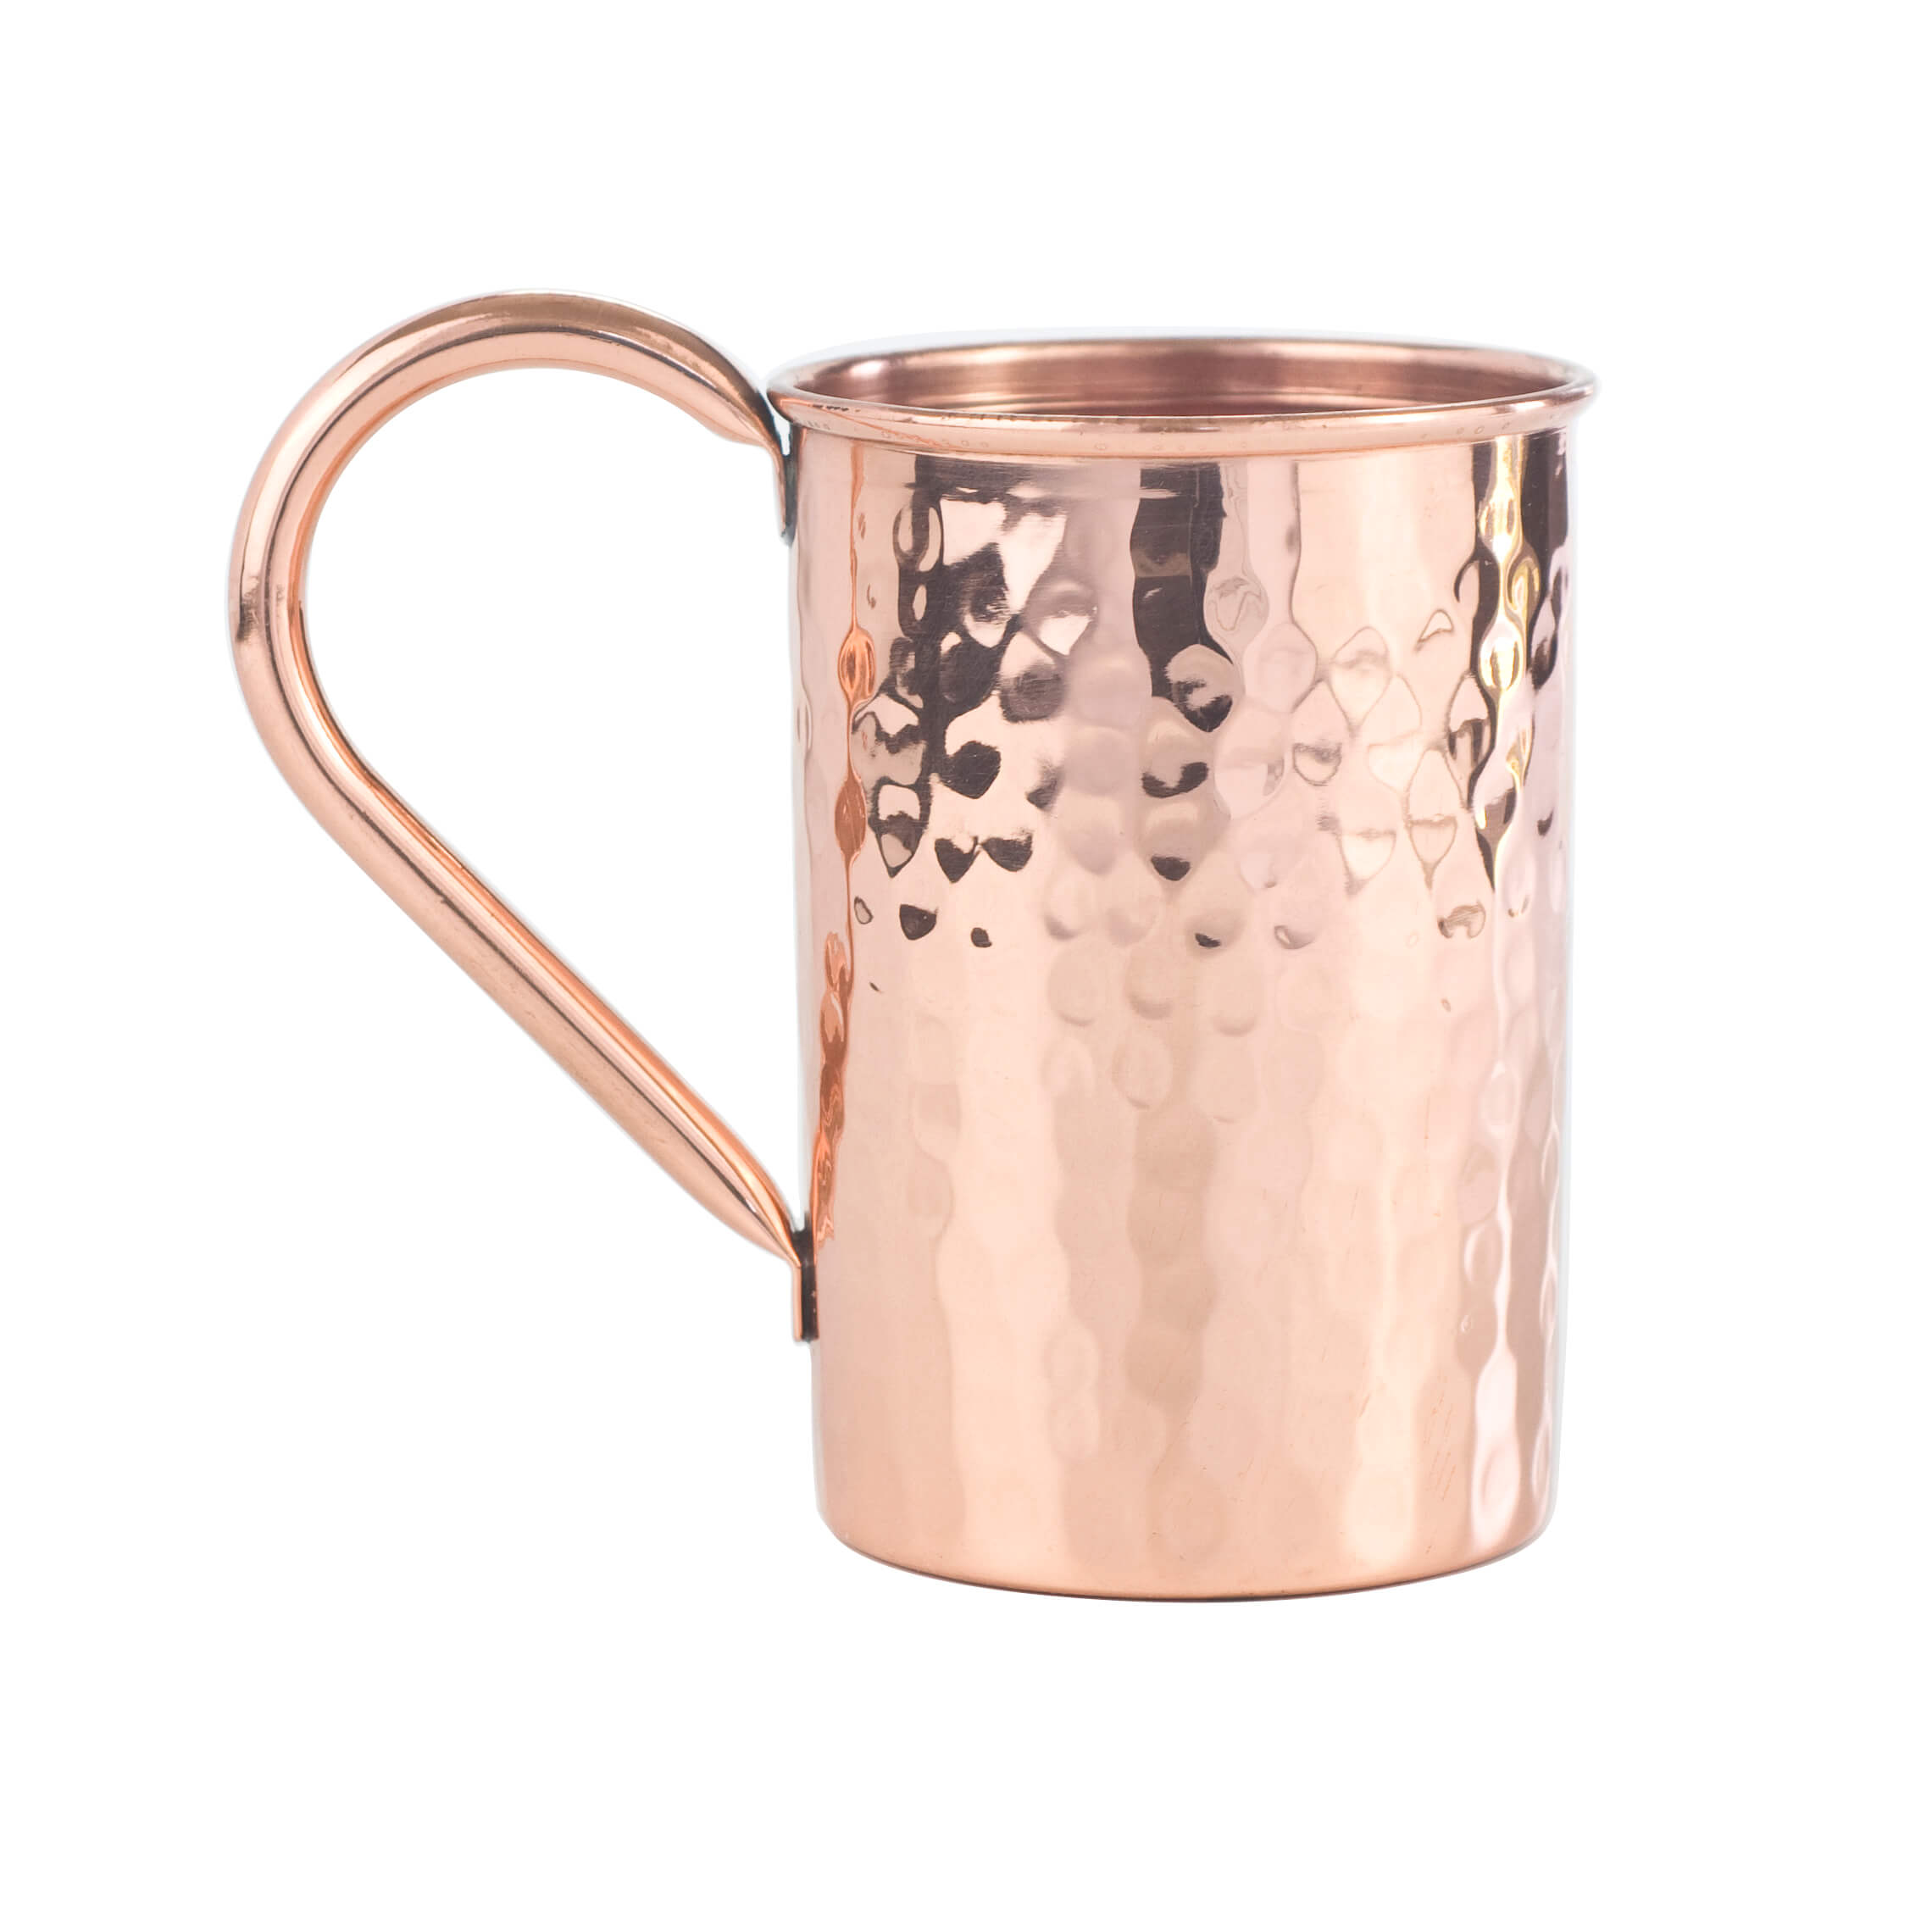 moscow-mule-cup-copper-mug-roosevelt-hammered-copper-mugs